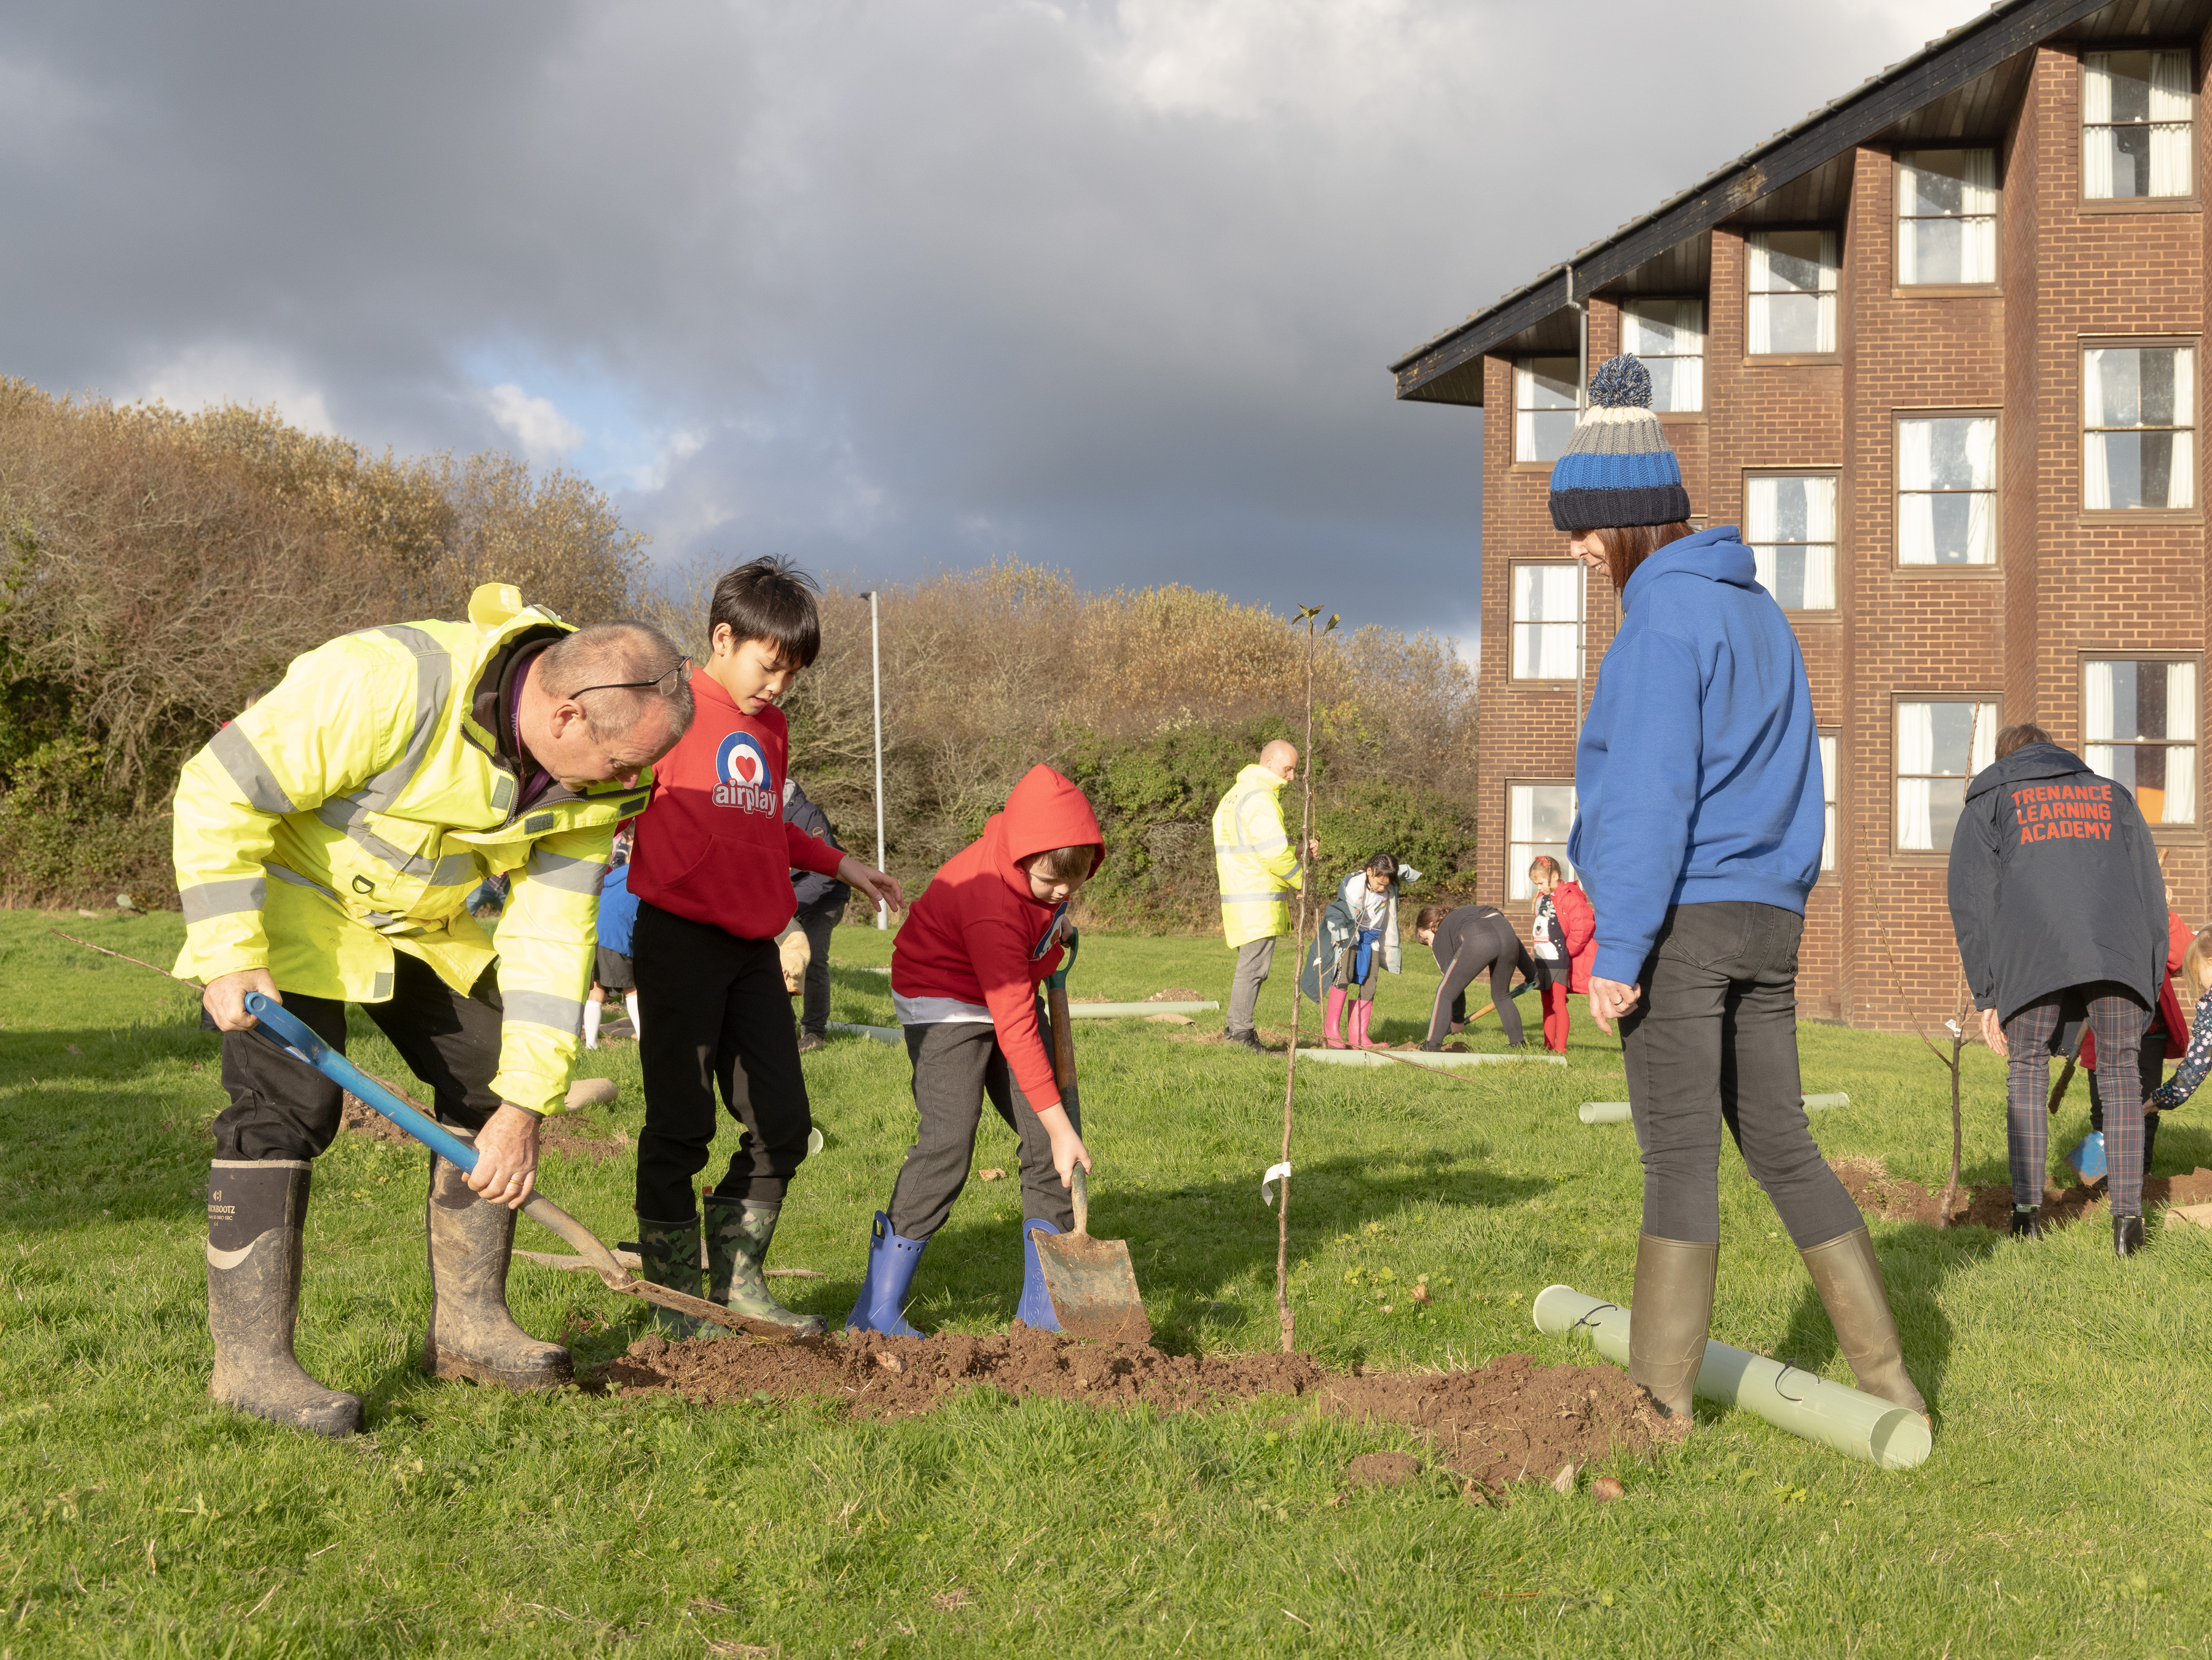 Image shows community and RAF aviators planting young trees and digging with spades.